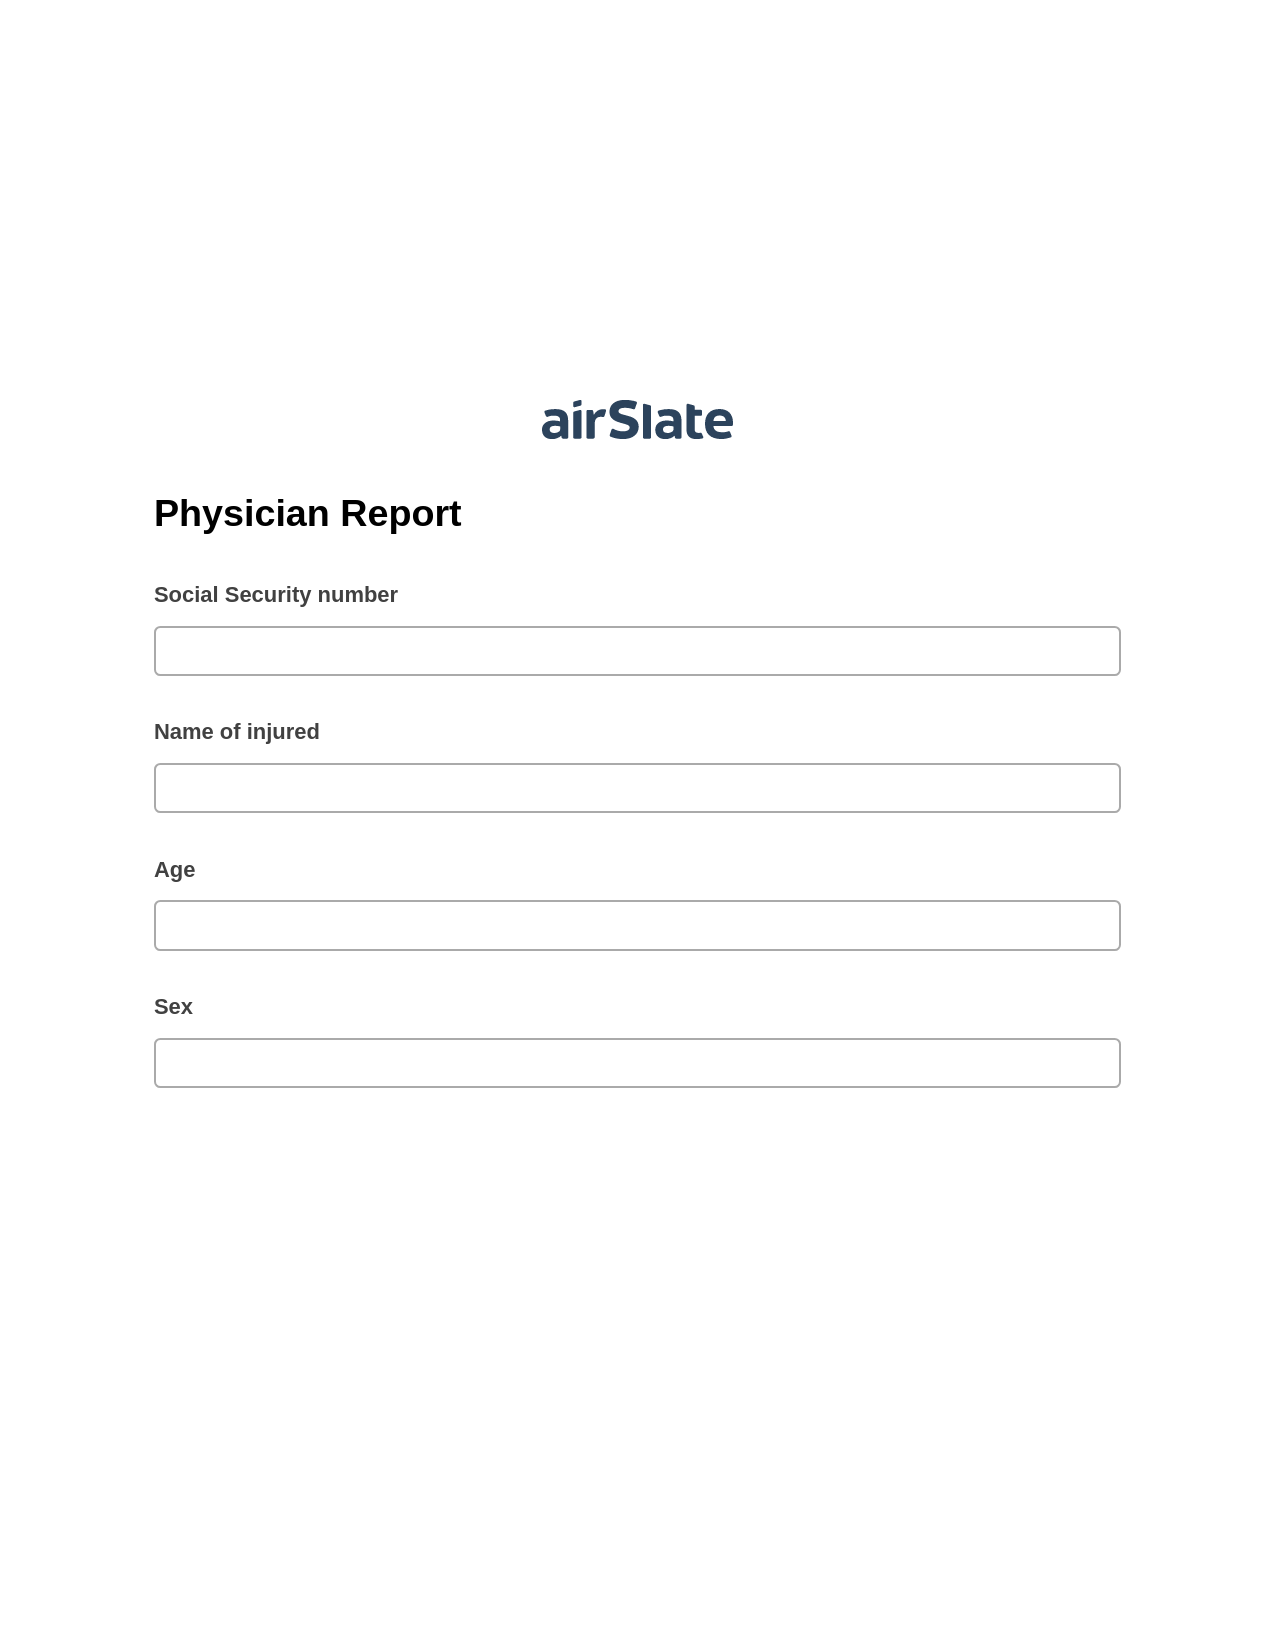 Multirole Physician Report Pre-fill from CSV File Bot, Revoke Access Bot, Archive to OneDrive Bot